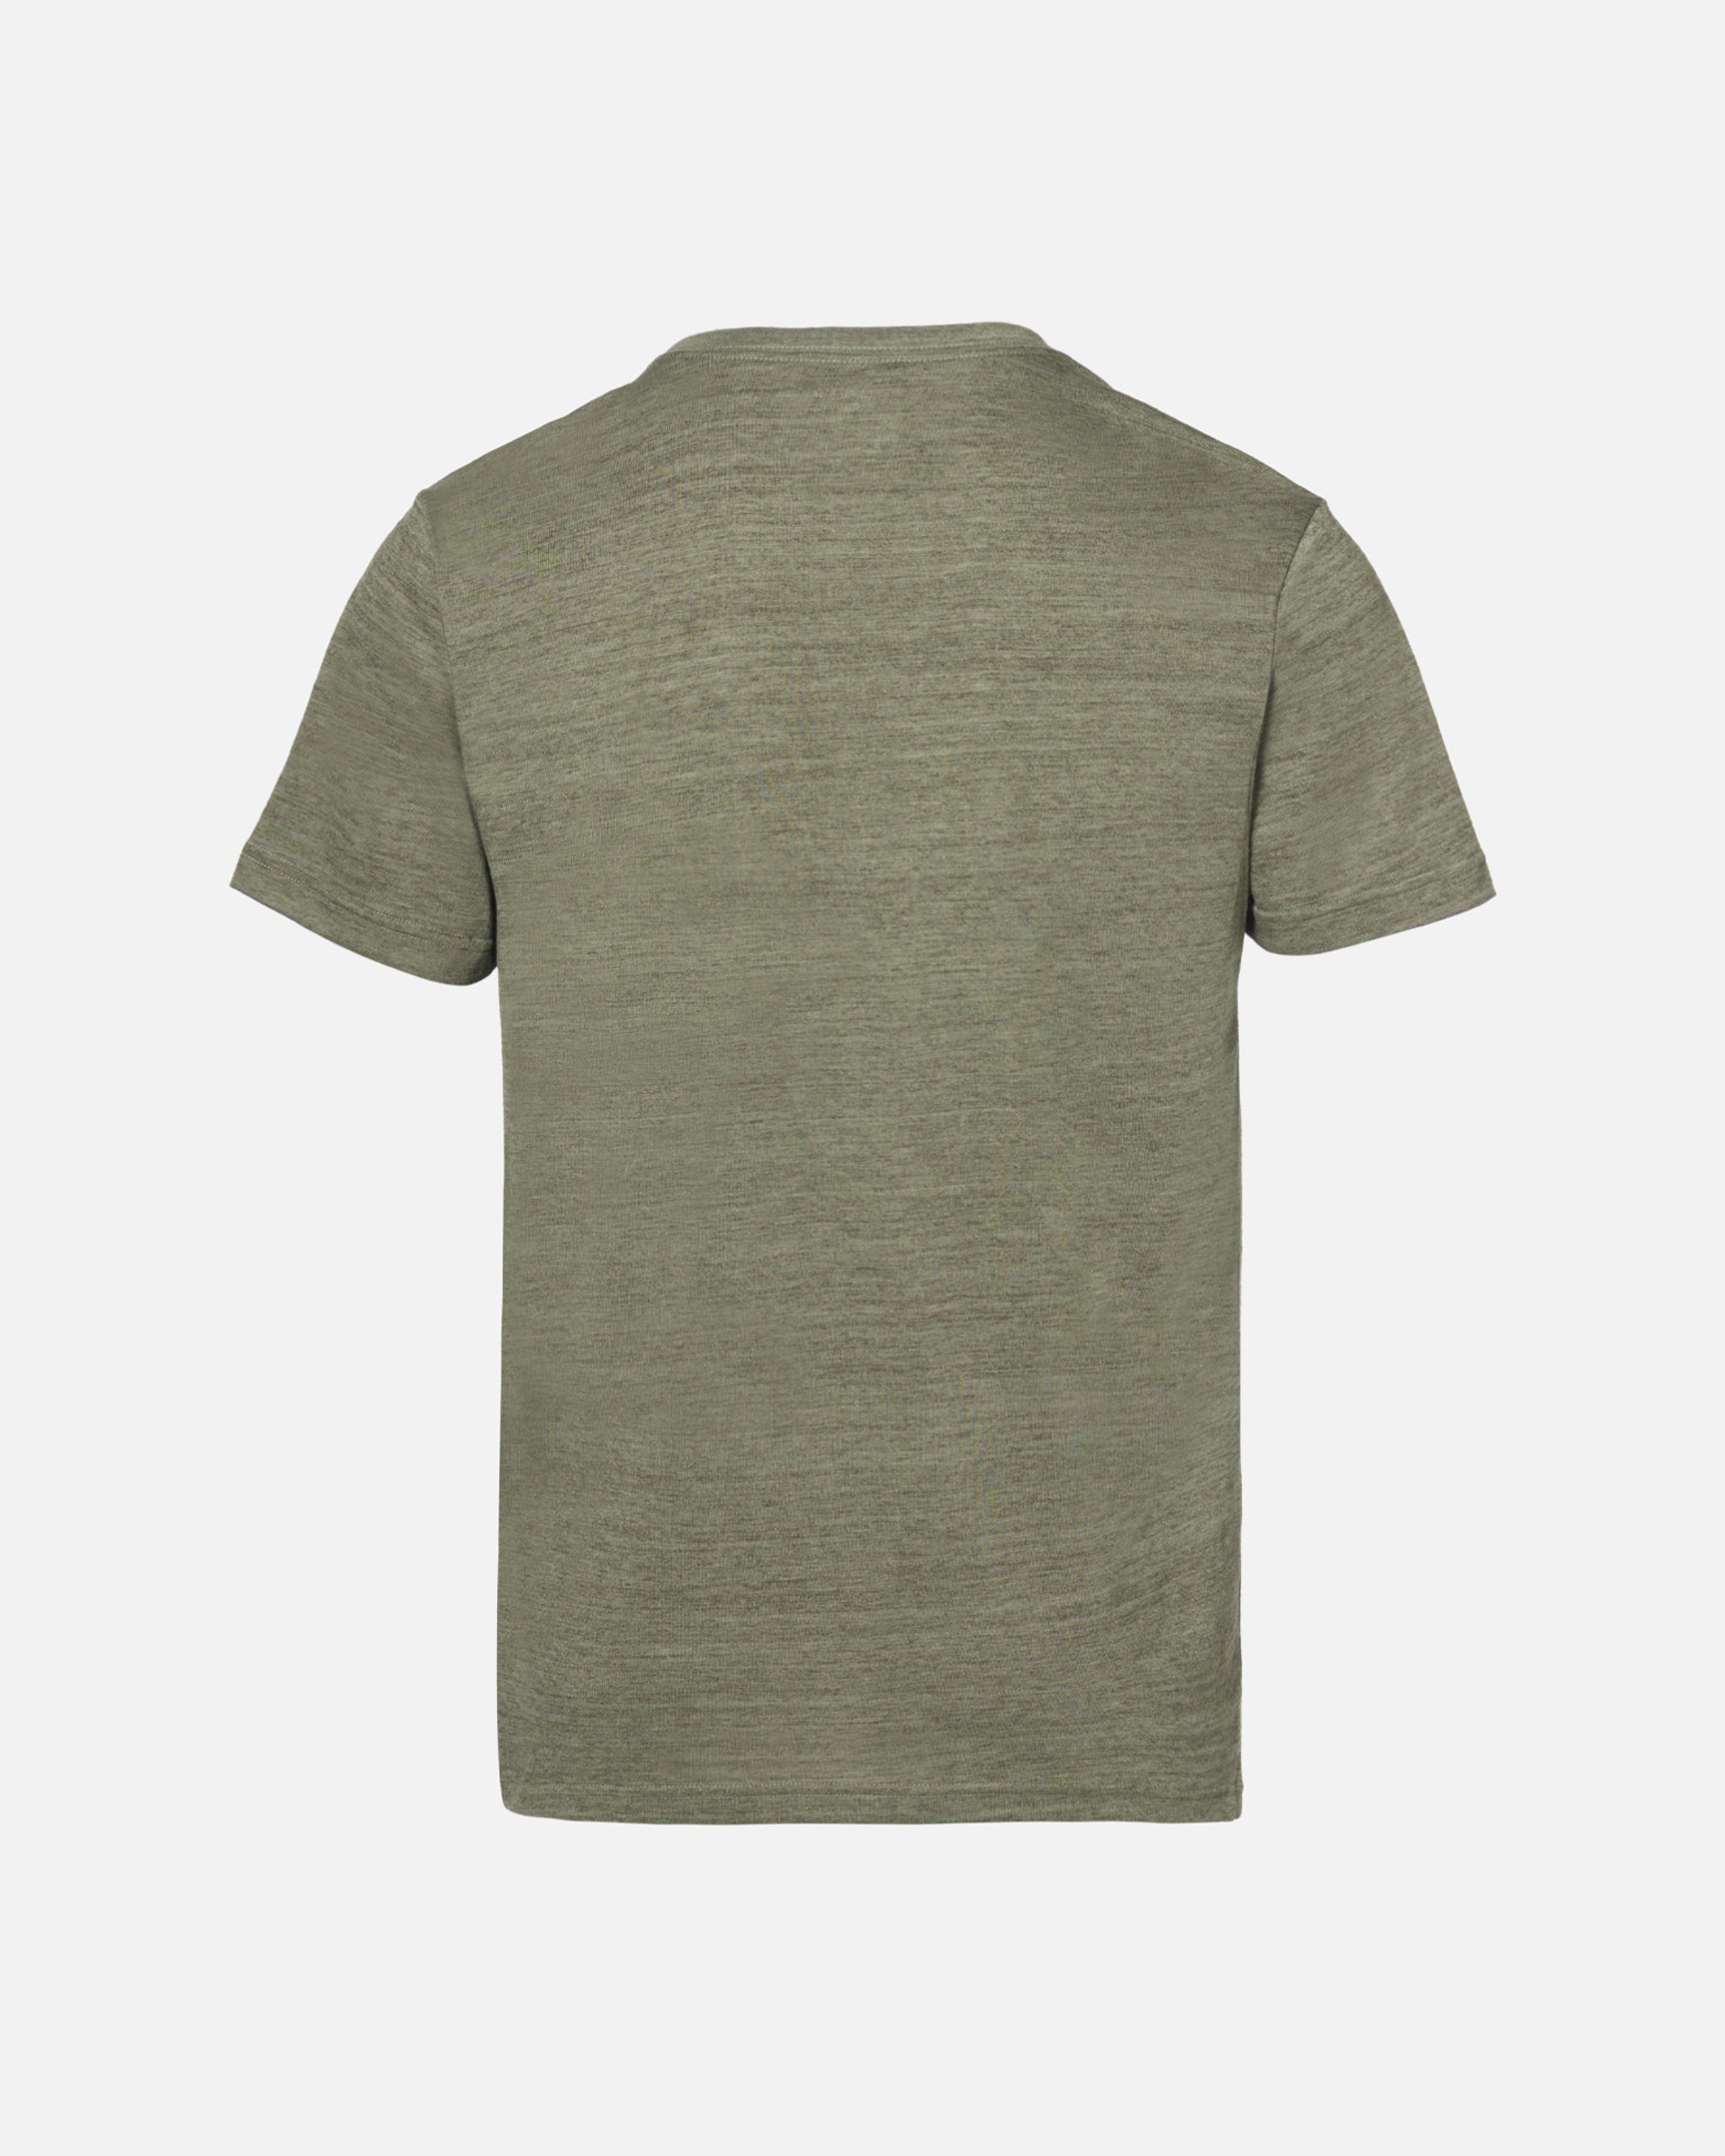 Men's Short Sleeve Performance T-Shirt - All In Motion™ Olive Green L